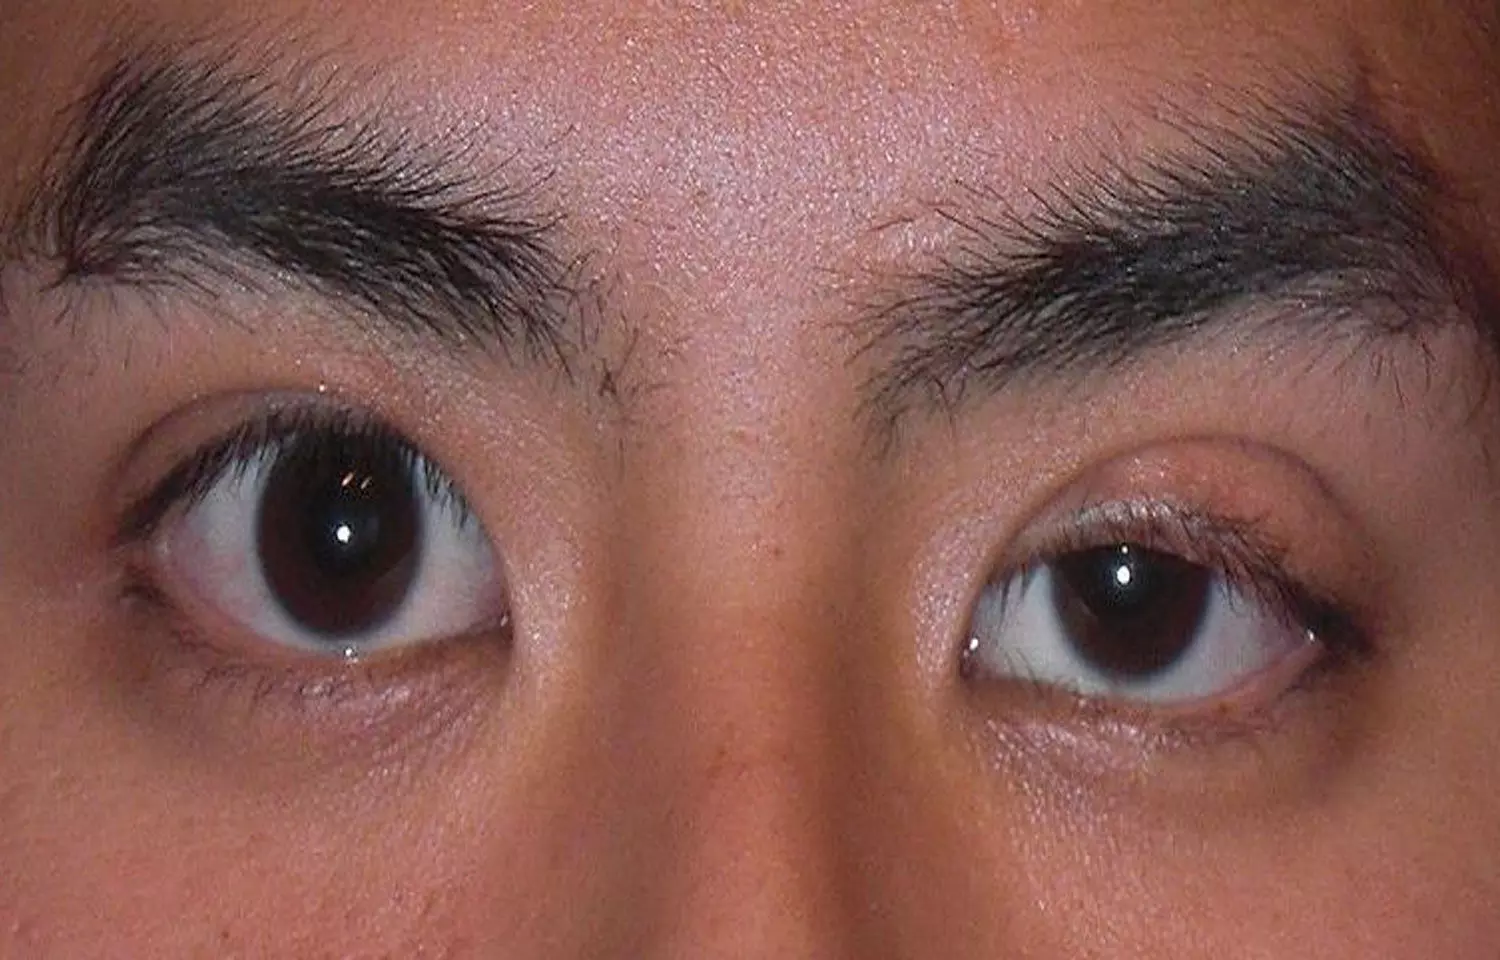 Rare case of Progressive Worsening of Unilateral Ptosis in Woman- A report